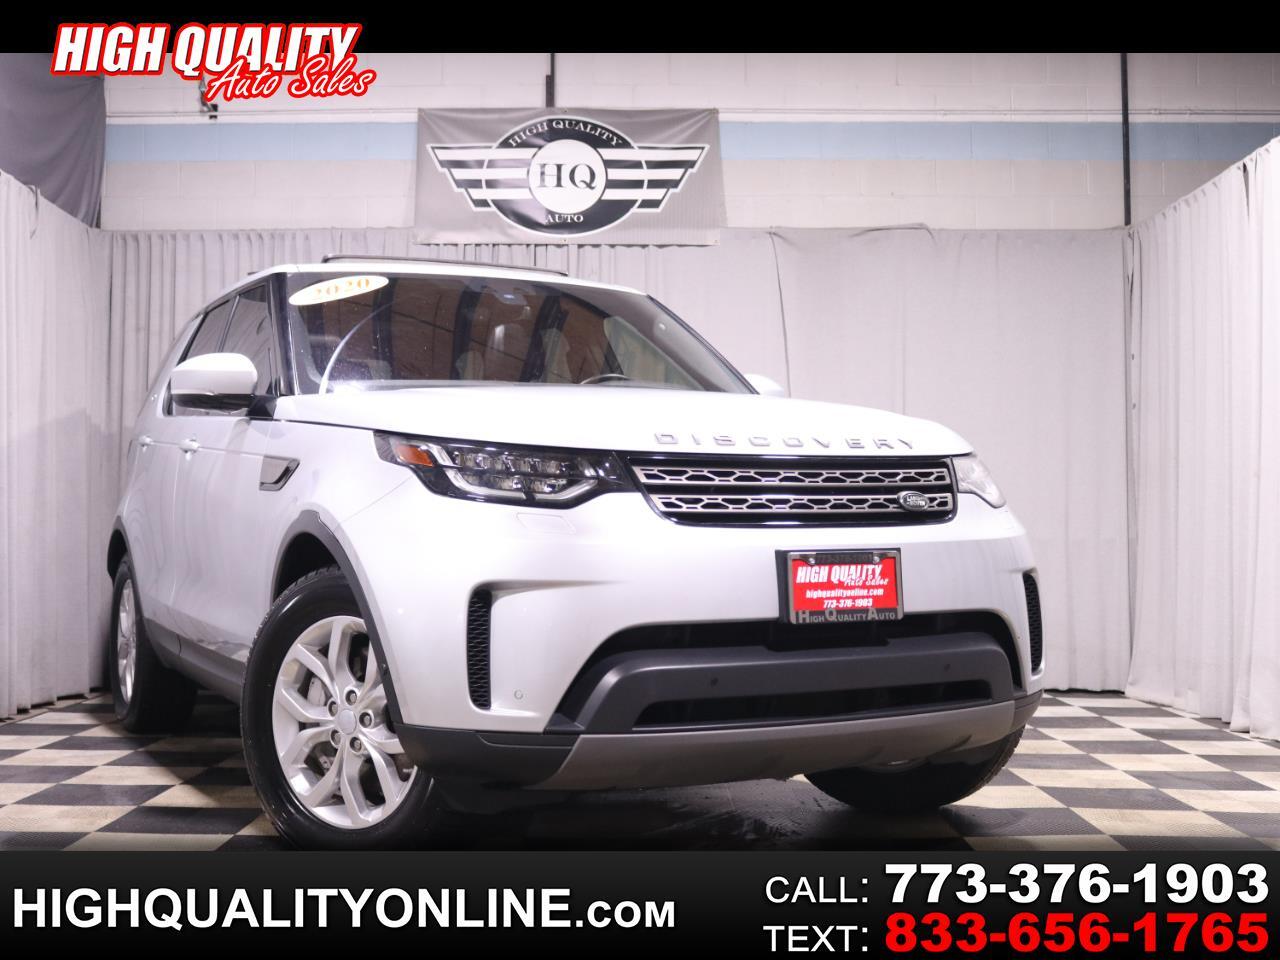 Land Rover Discovery SE V6 Supercharged 2020